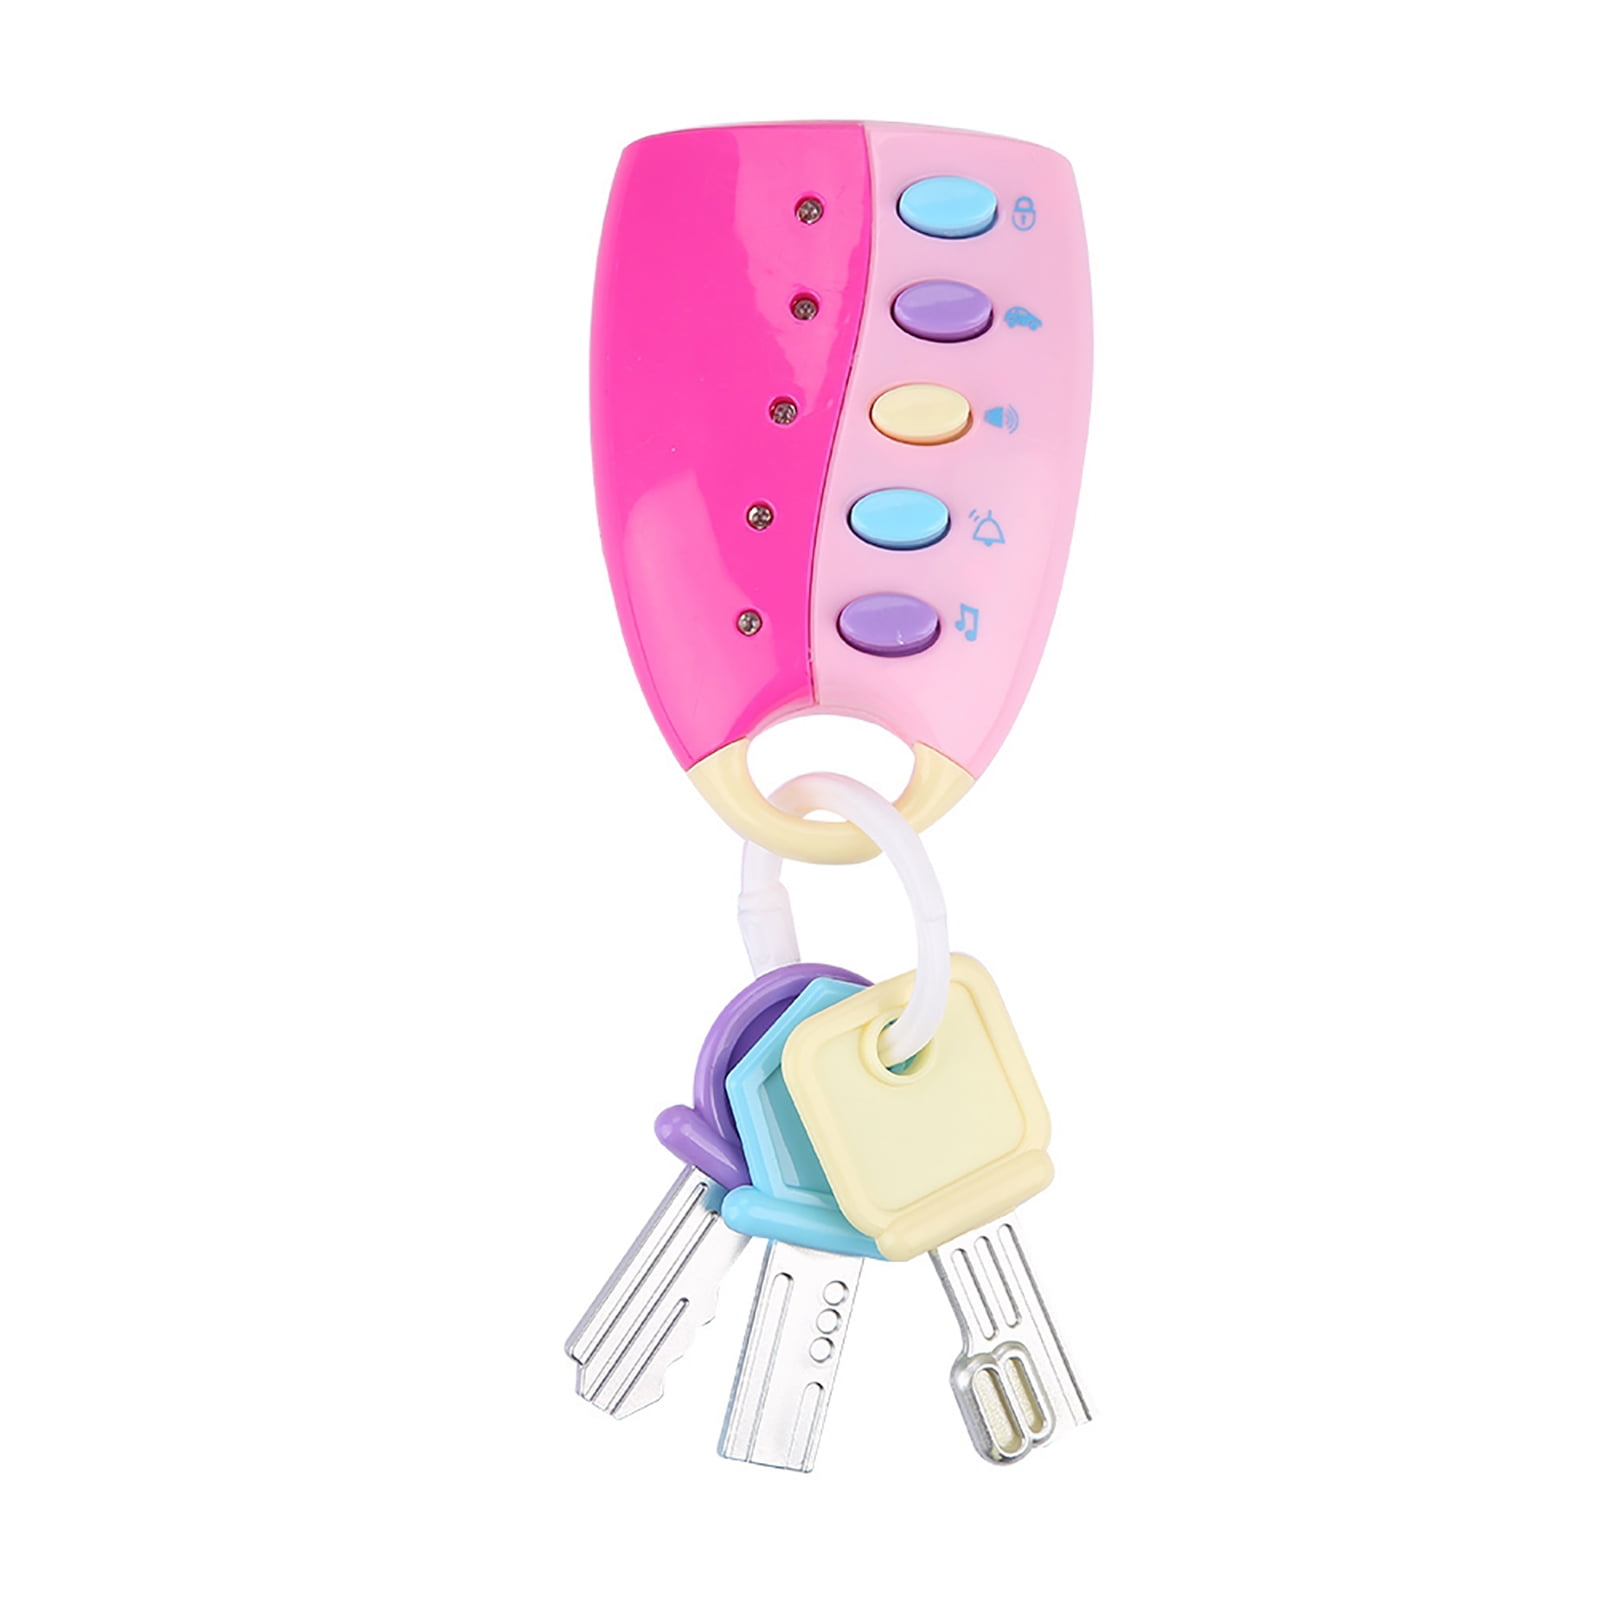 PATPAT Musical Smart Remote Key Toys for Baby, Fake Car Toy Keys with Sound  and Lights - Musical Smart Remote Key Toys for Baby, Fake Car Toy Keys with  Sound and Lights .